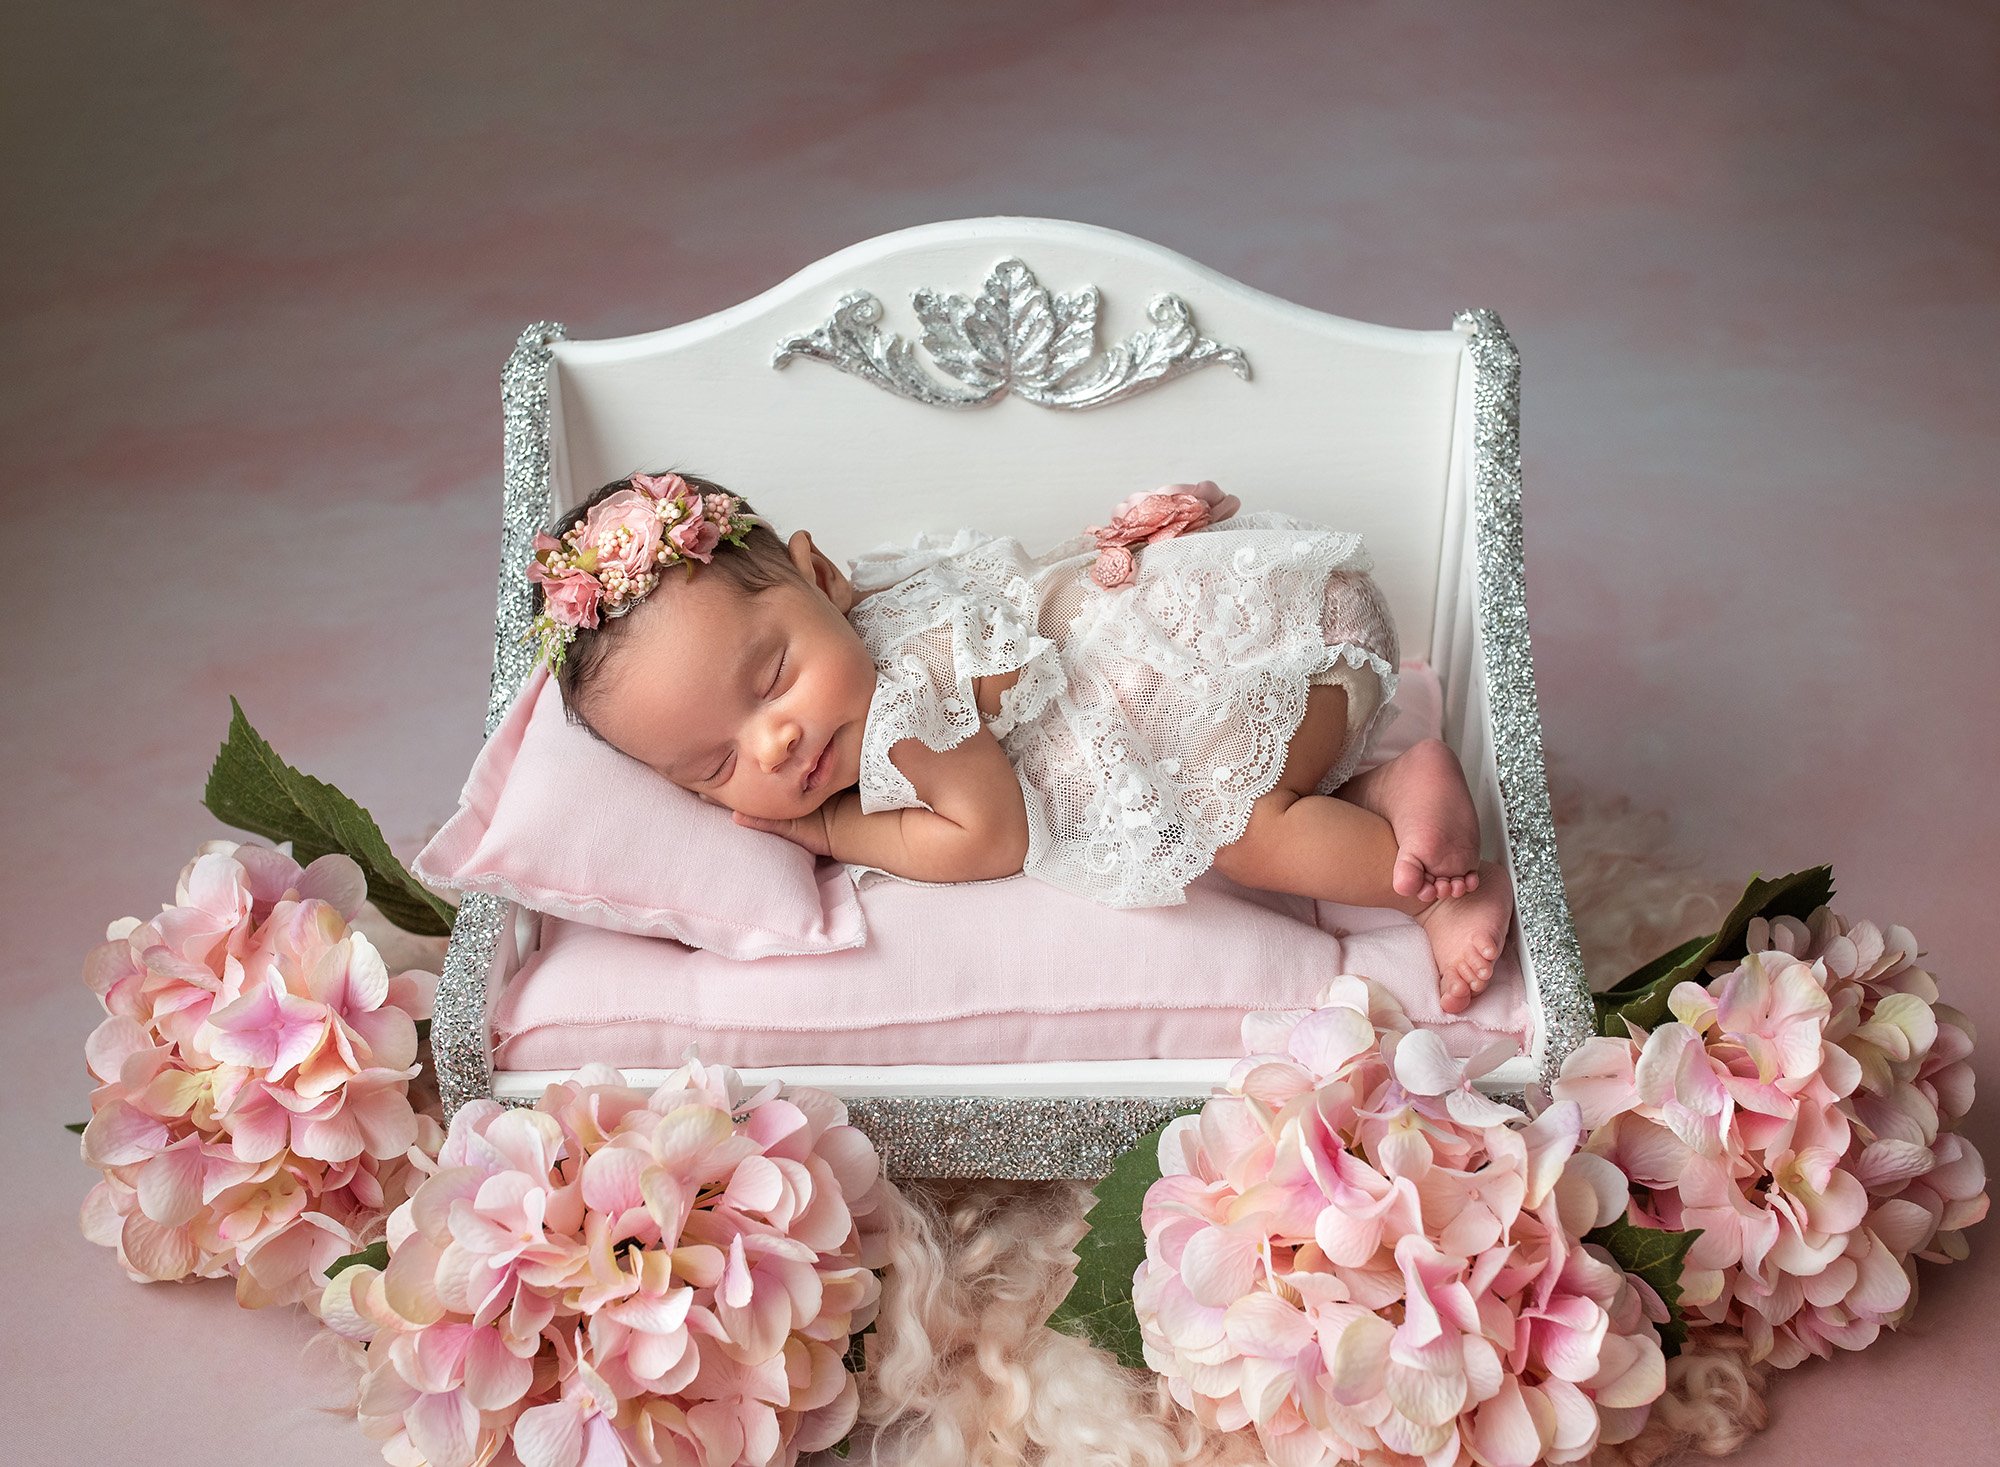 girly girl newborn photos newborn girl wearing lace sleeping on miniature bed surrounded by pink flowers